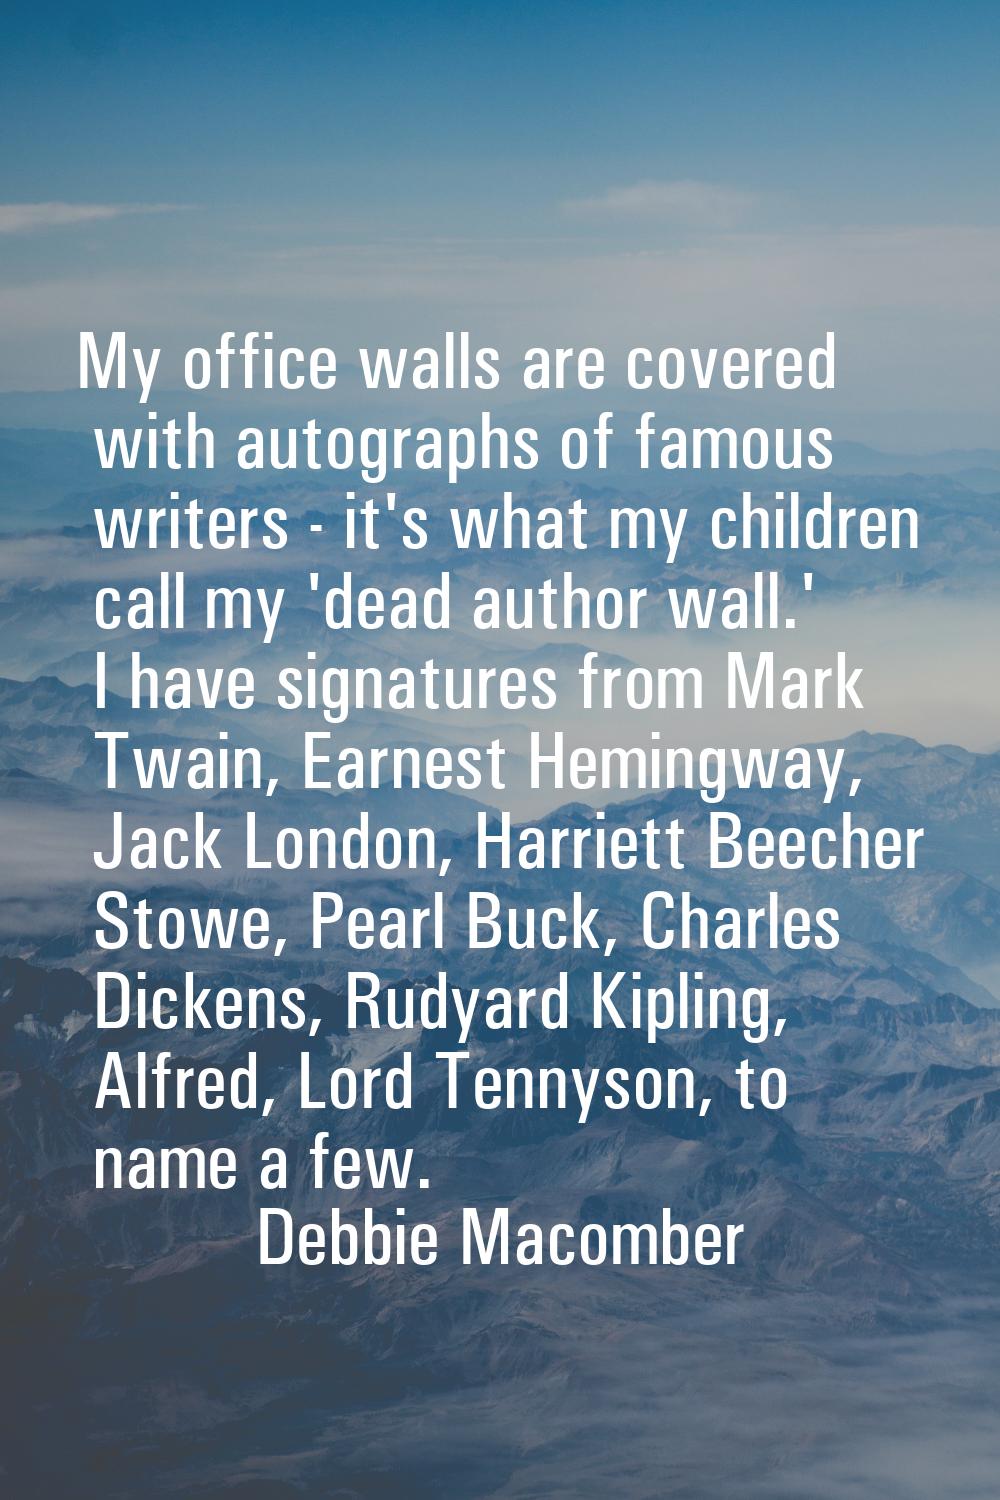 My office walls are covered with autographs of famous writers - it's what my children call my 'dead